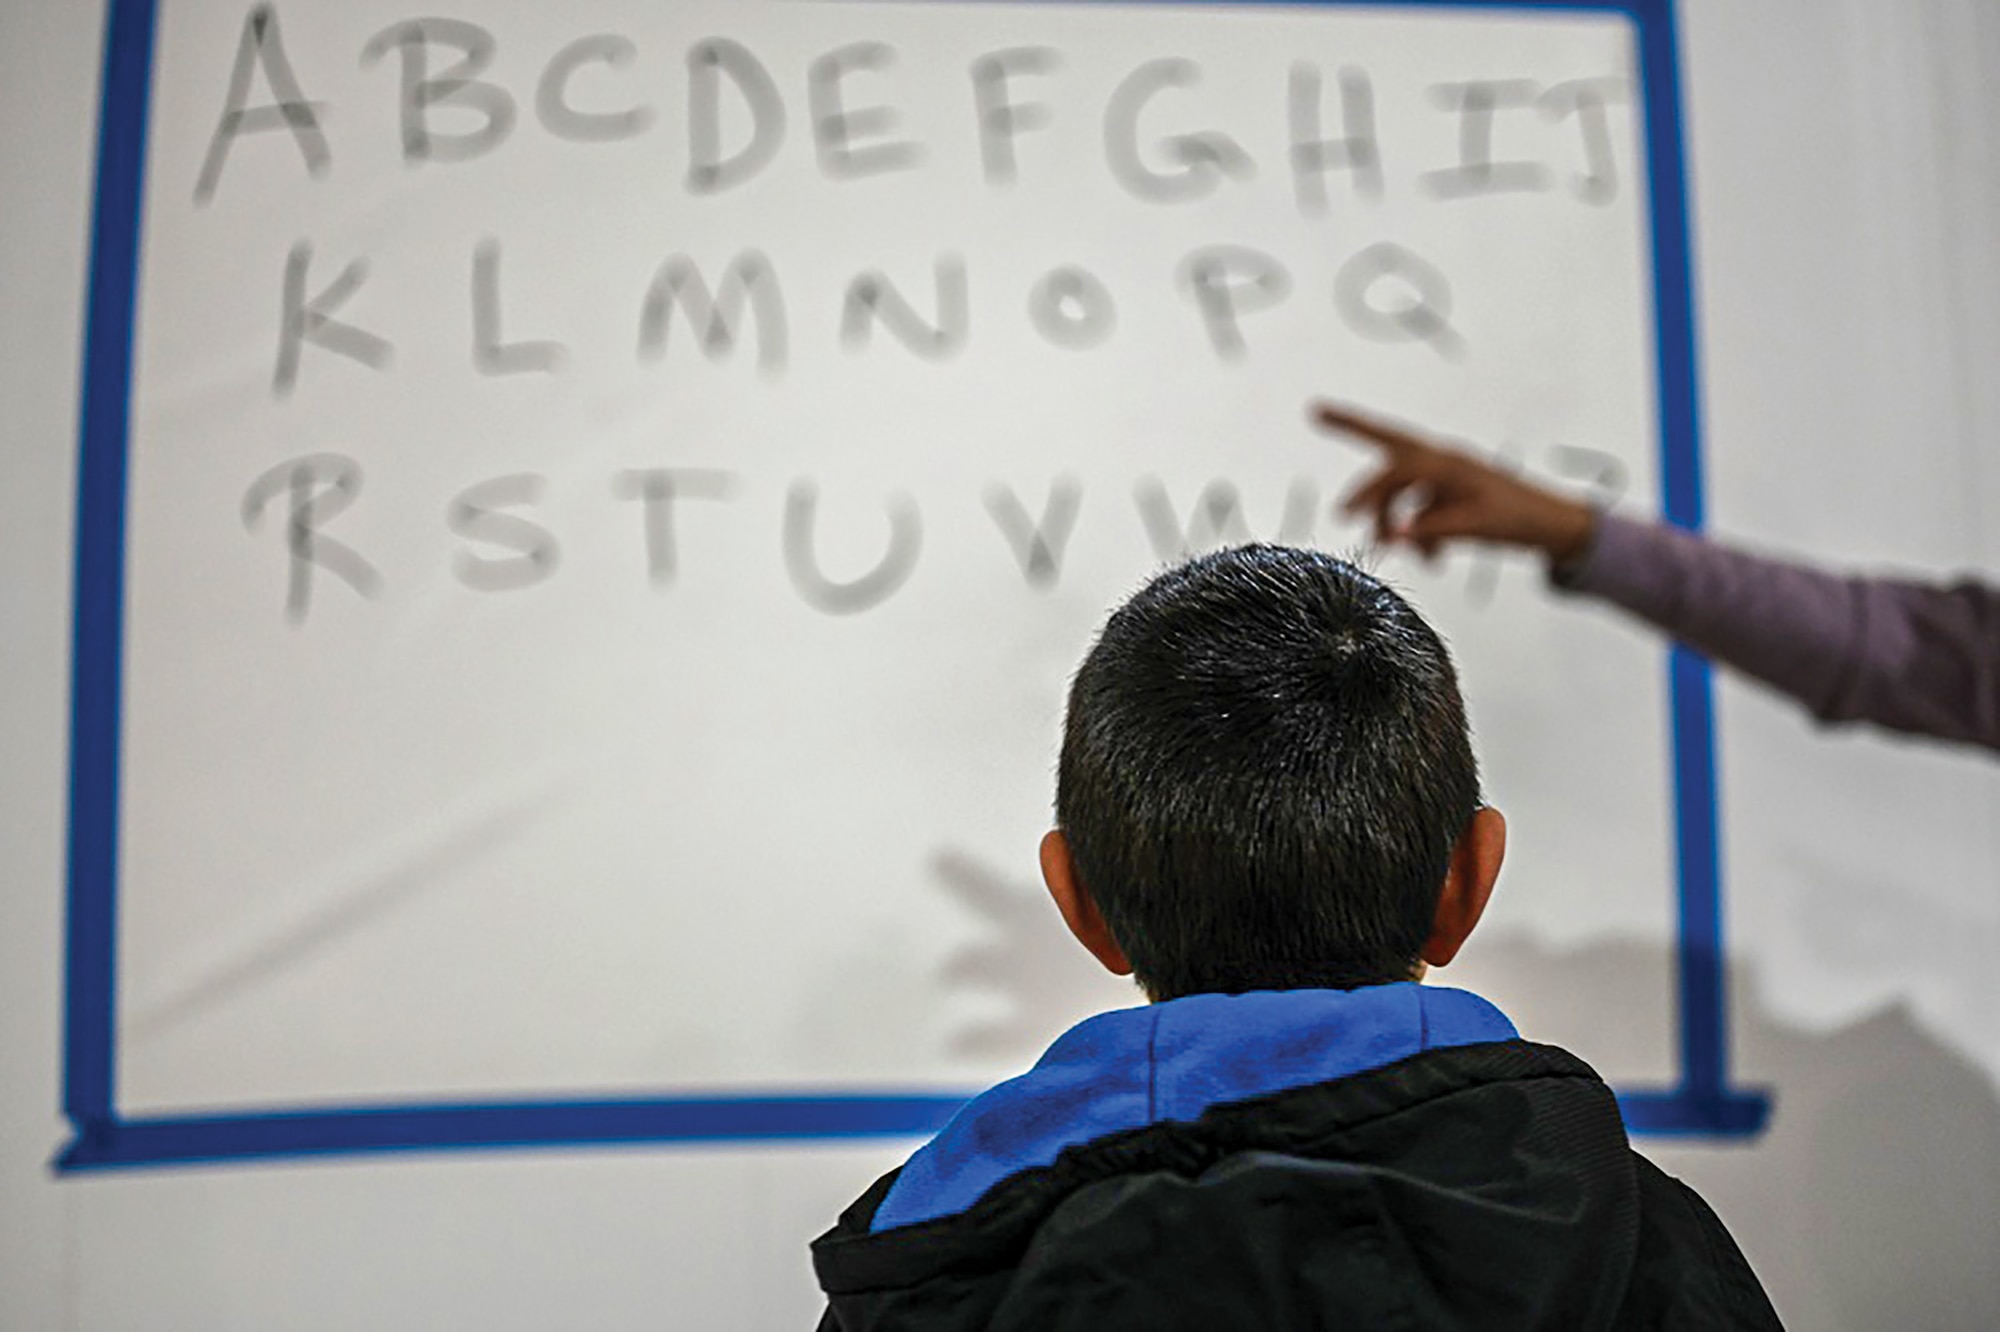 A teacher instructs Afghan students during the first day of community-based education in Liberty Village, Joint Base McGuire-Dix-Lakehurst, New Jersey, Dec. 20, 2021.